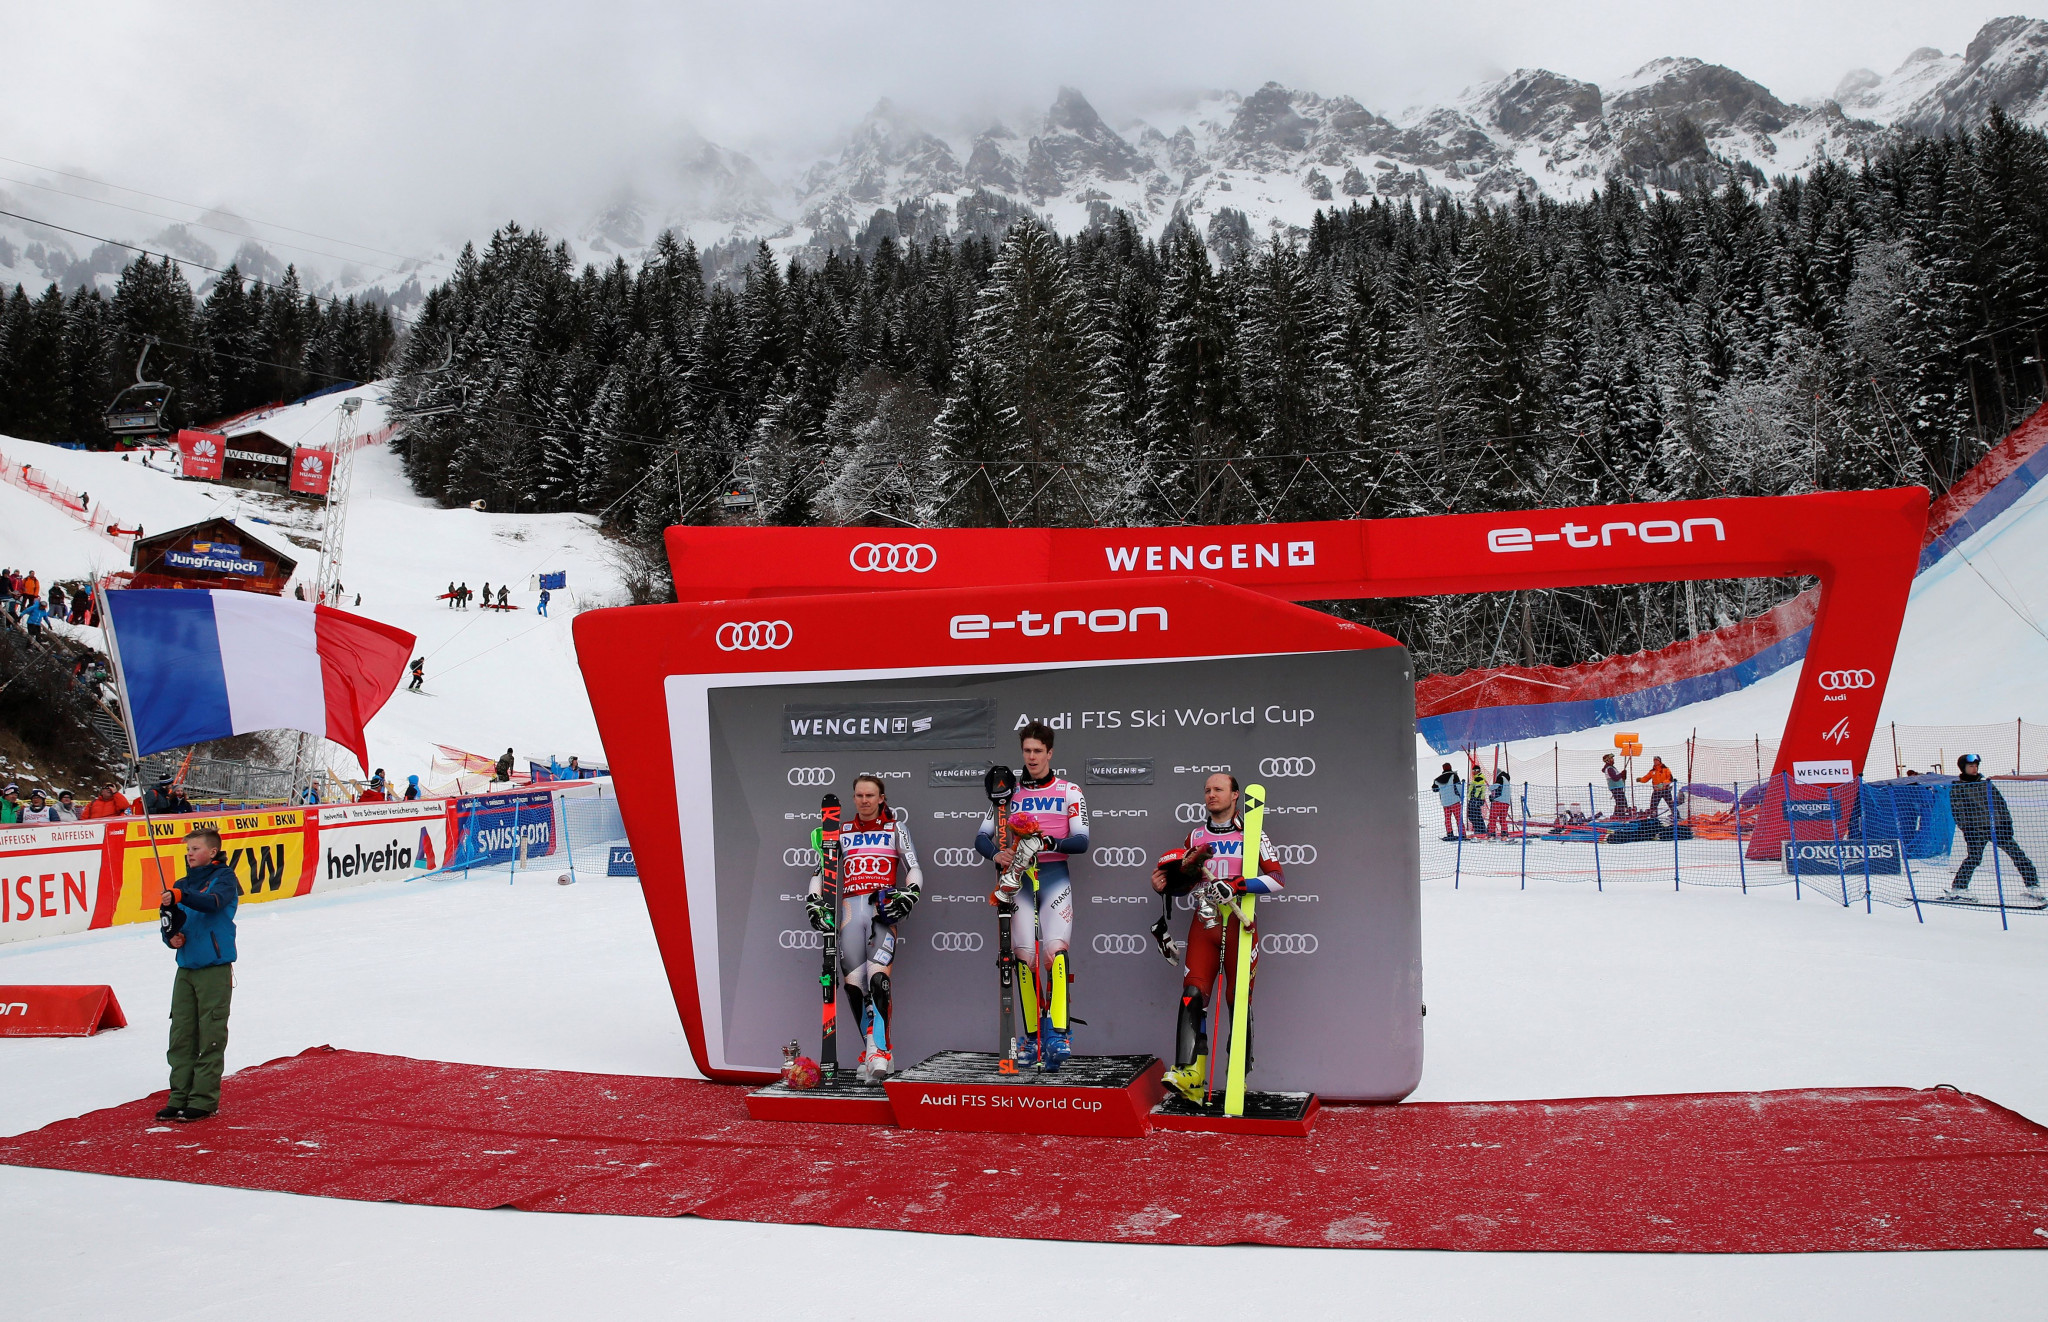 The FIS Alpine Ski World Cup in Wengen has been cancelled ©Getty Images